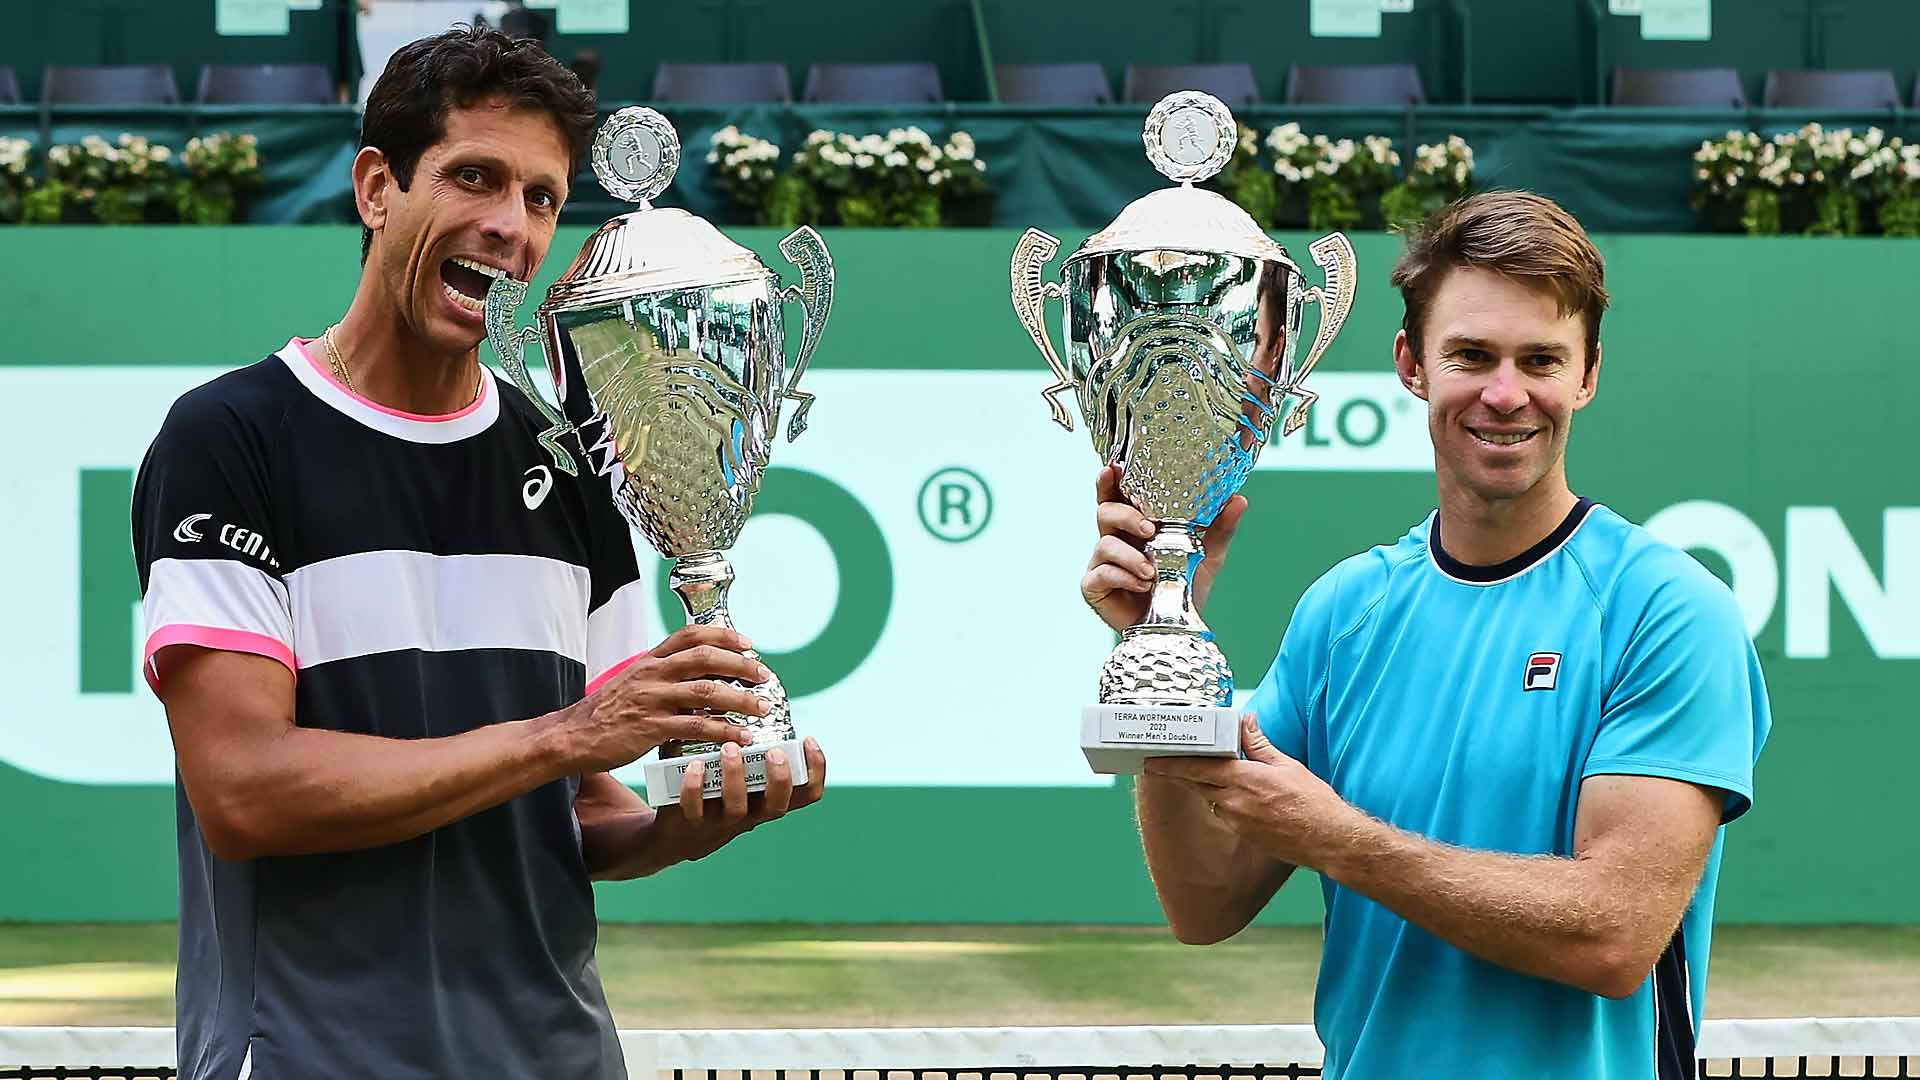 Marcelo Melo and John Peers Triumph In Halle ATP Tour Tennis